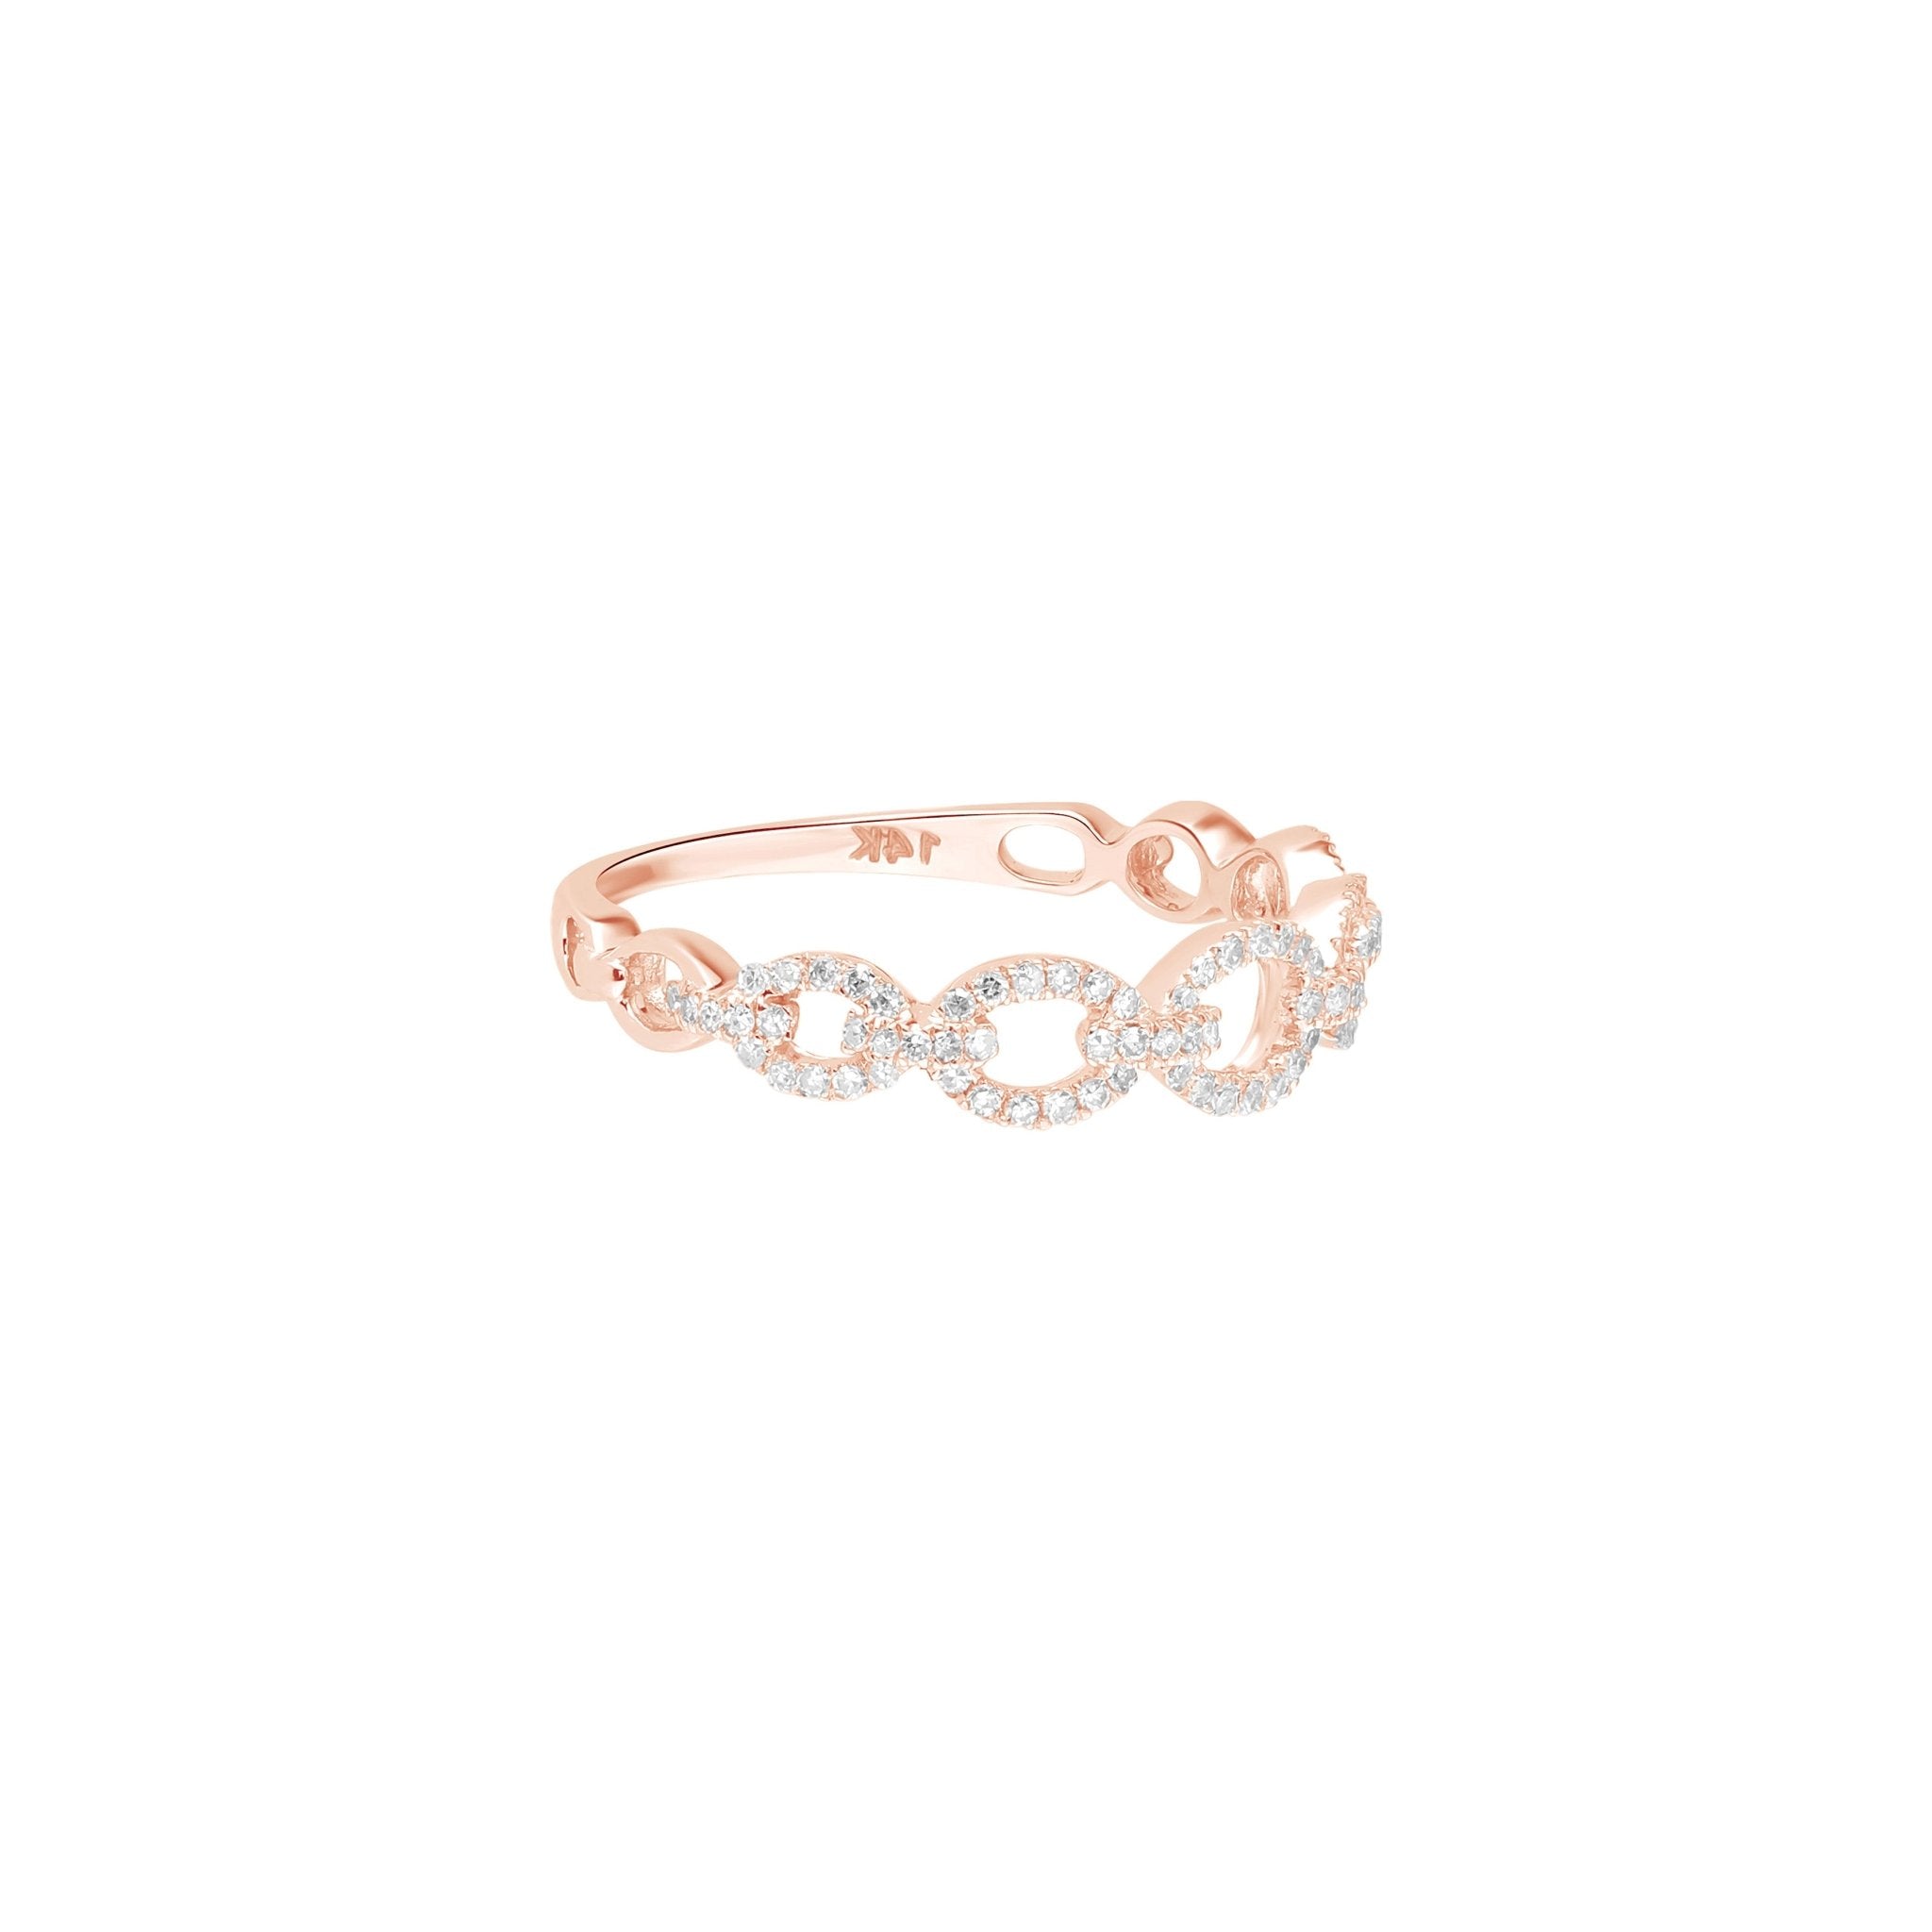 Diamond Chain Link Ring Rings Estella Collection #product_description# 17701 14k Band Colorless Gemstone #tag4# #tag5# #tag6# #tag7# #tag8# #tag9# #tag10# 6